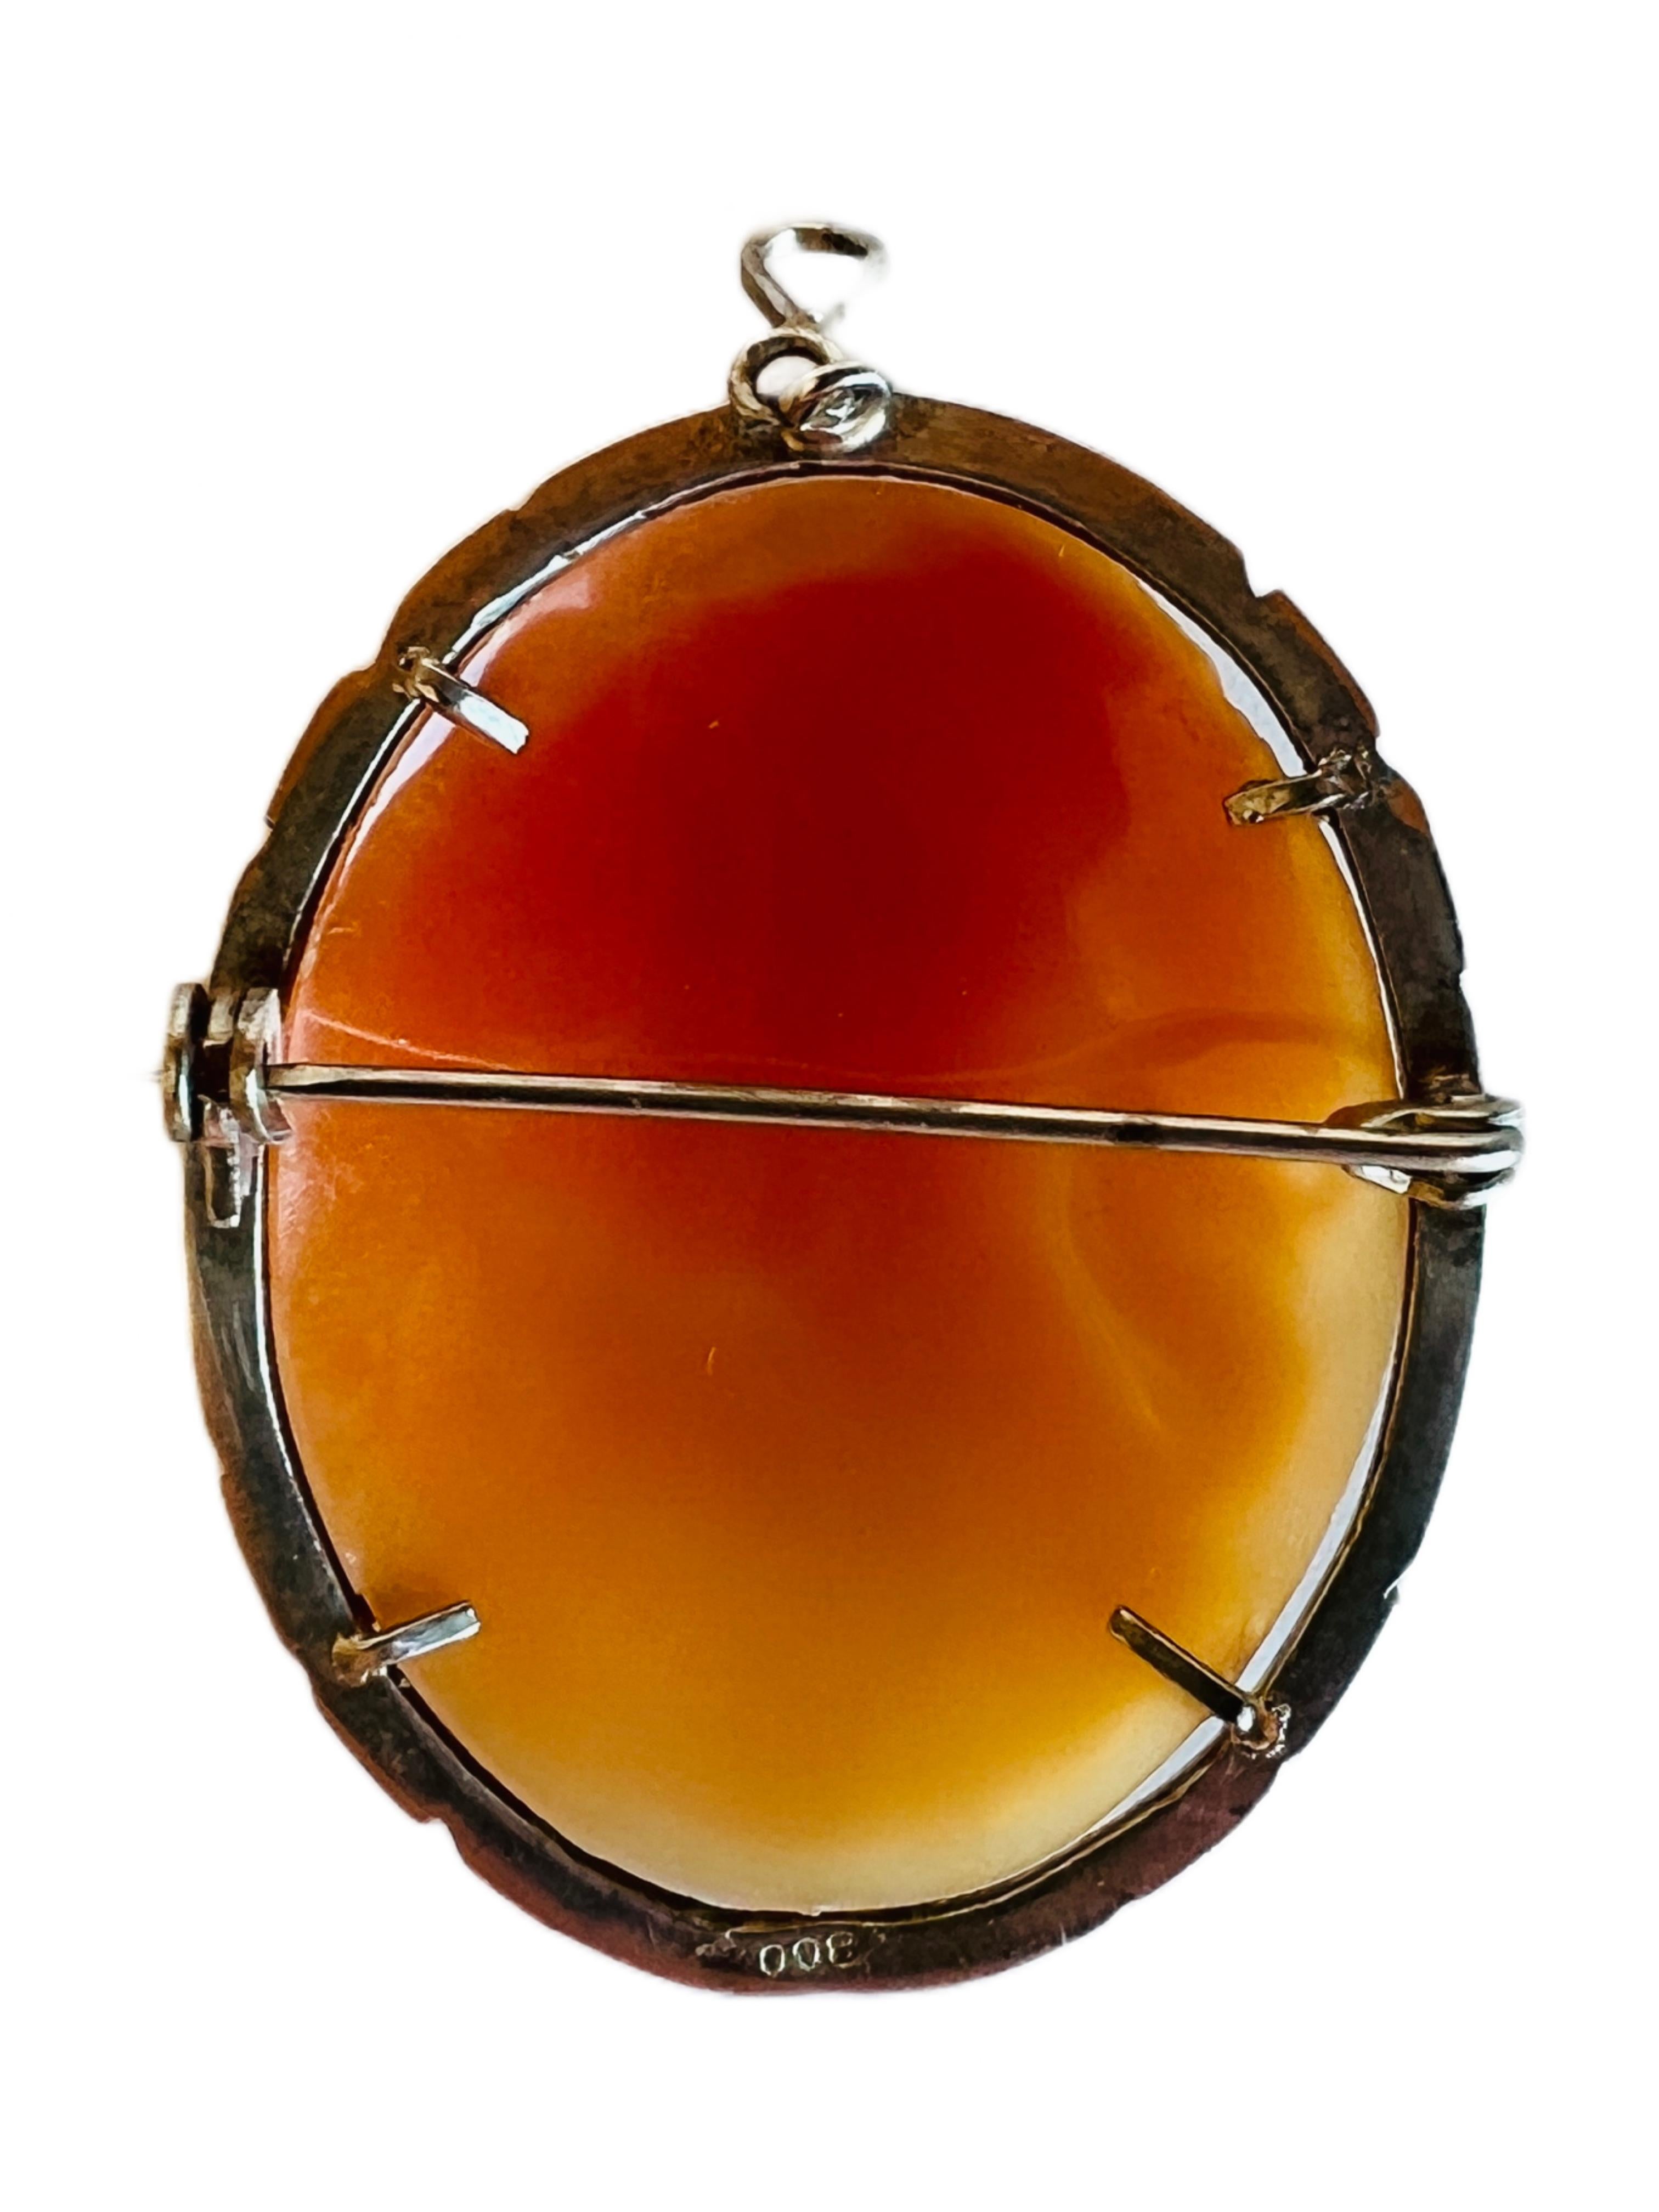 Detailed cameo shell brooch and necklace pendant adorned with marcasites.

Weight: 5.7 grams.
Size: 1-1/2